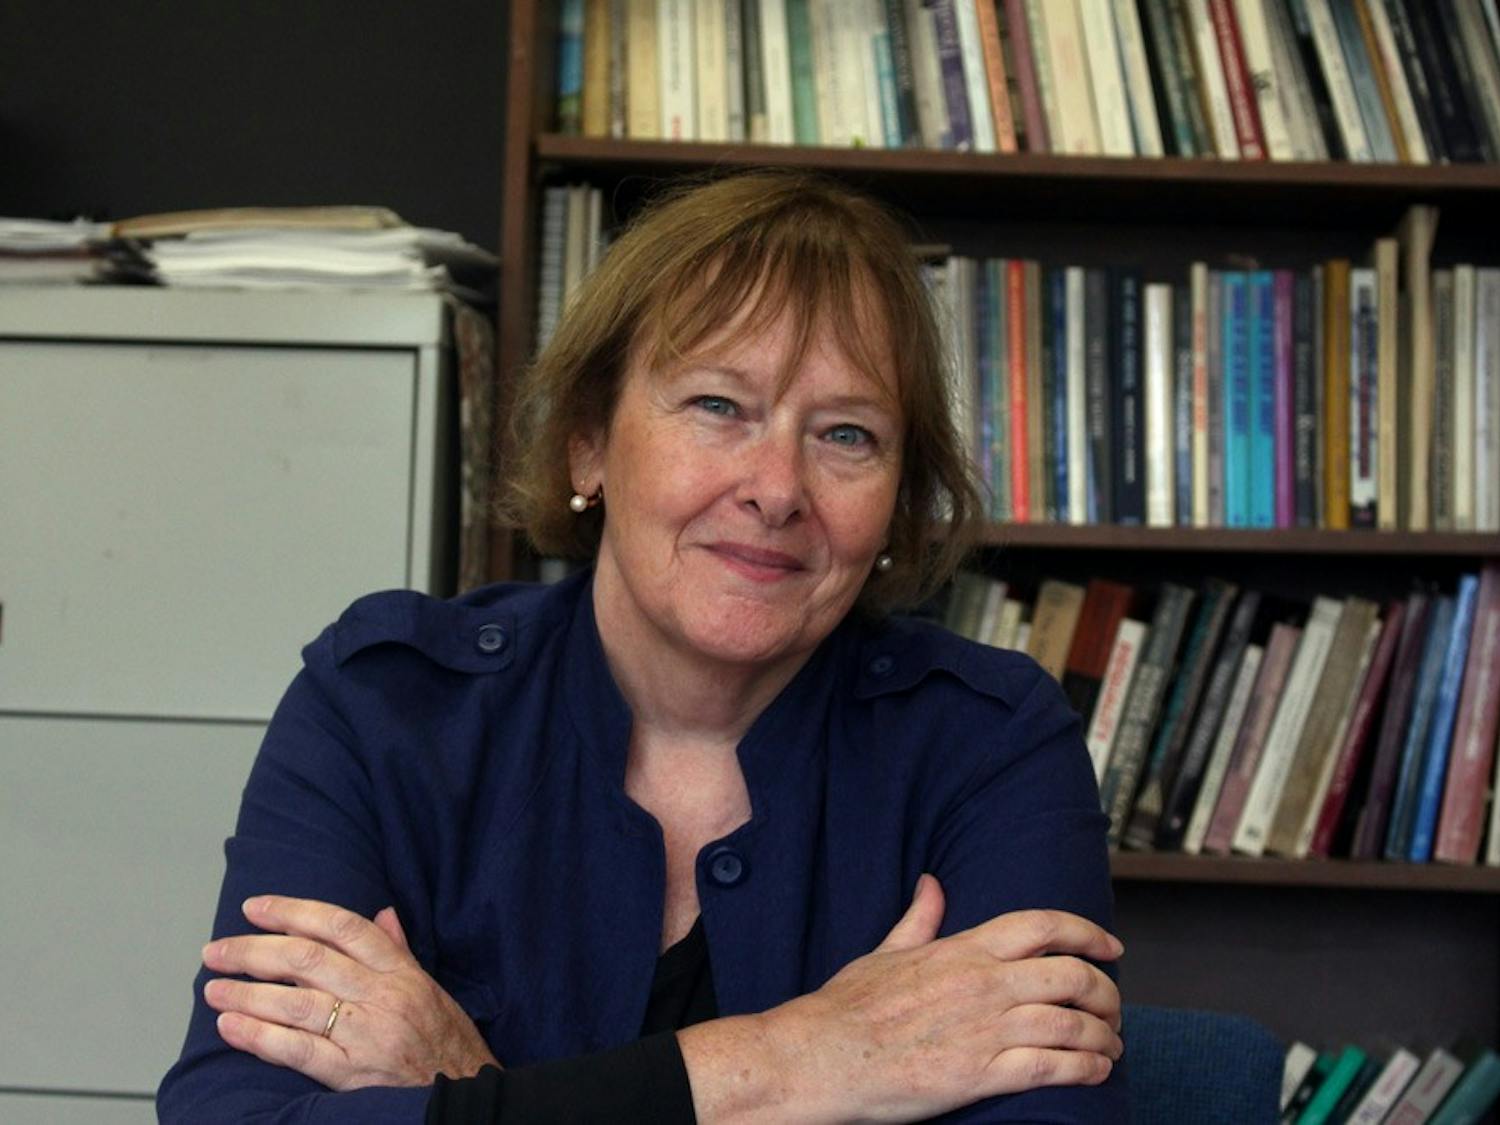 Dr. Deborah Reed-Danahay received a prestigious Jean Monnet Chair teaching post. She is a cultural anthropologist who conducts research and educates students on people in Western Europe.